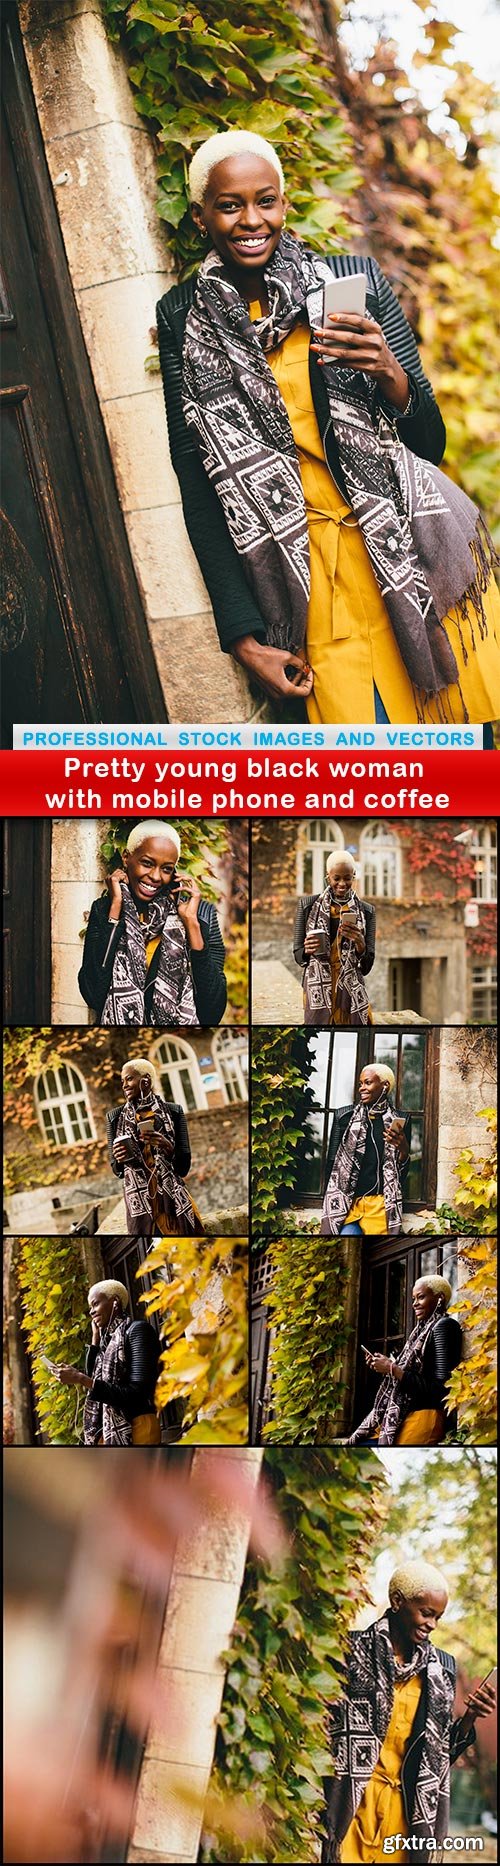 Pretty young black woman with mobile phone and coffee - 8 UHQ JPEG